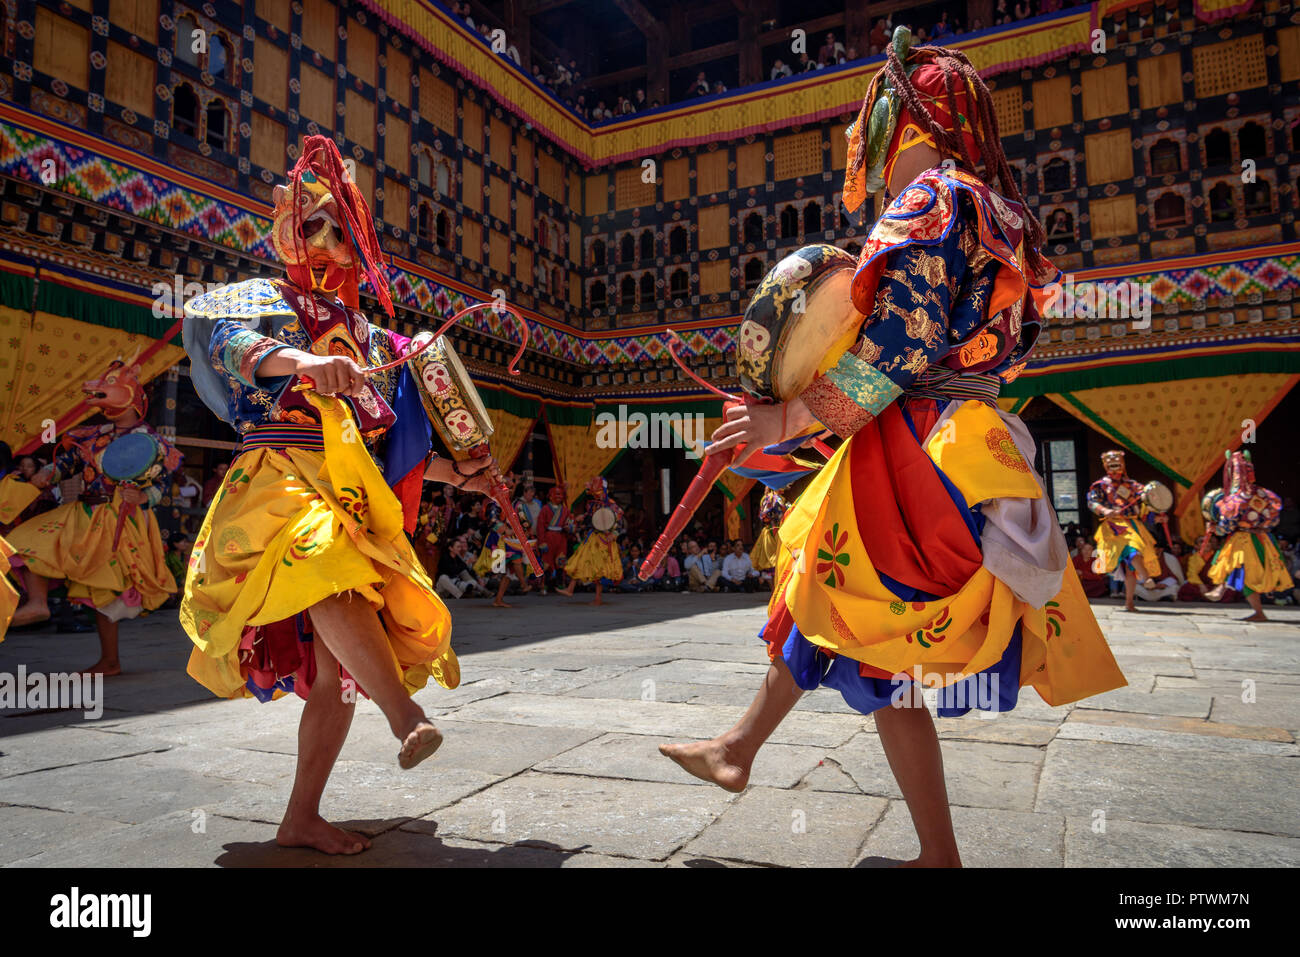 Buddhist Monk dancing and holding a drum at colourful mask dance at yearly buddhism Paro Tsechu festival in Bhutan monastery temple location. Stock Photo